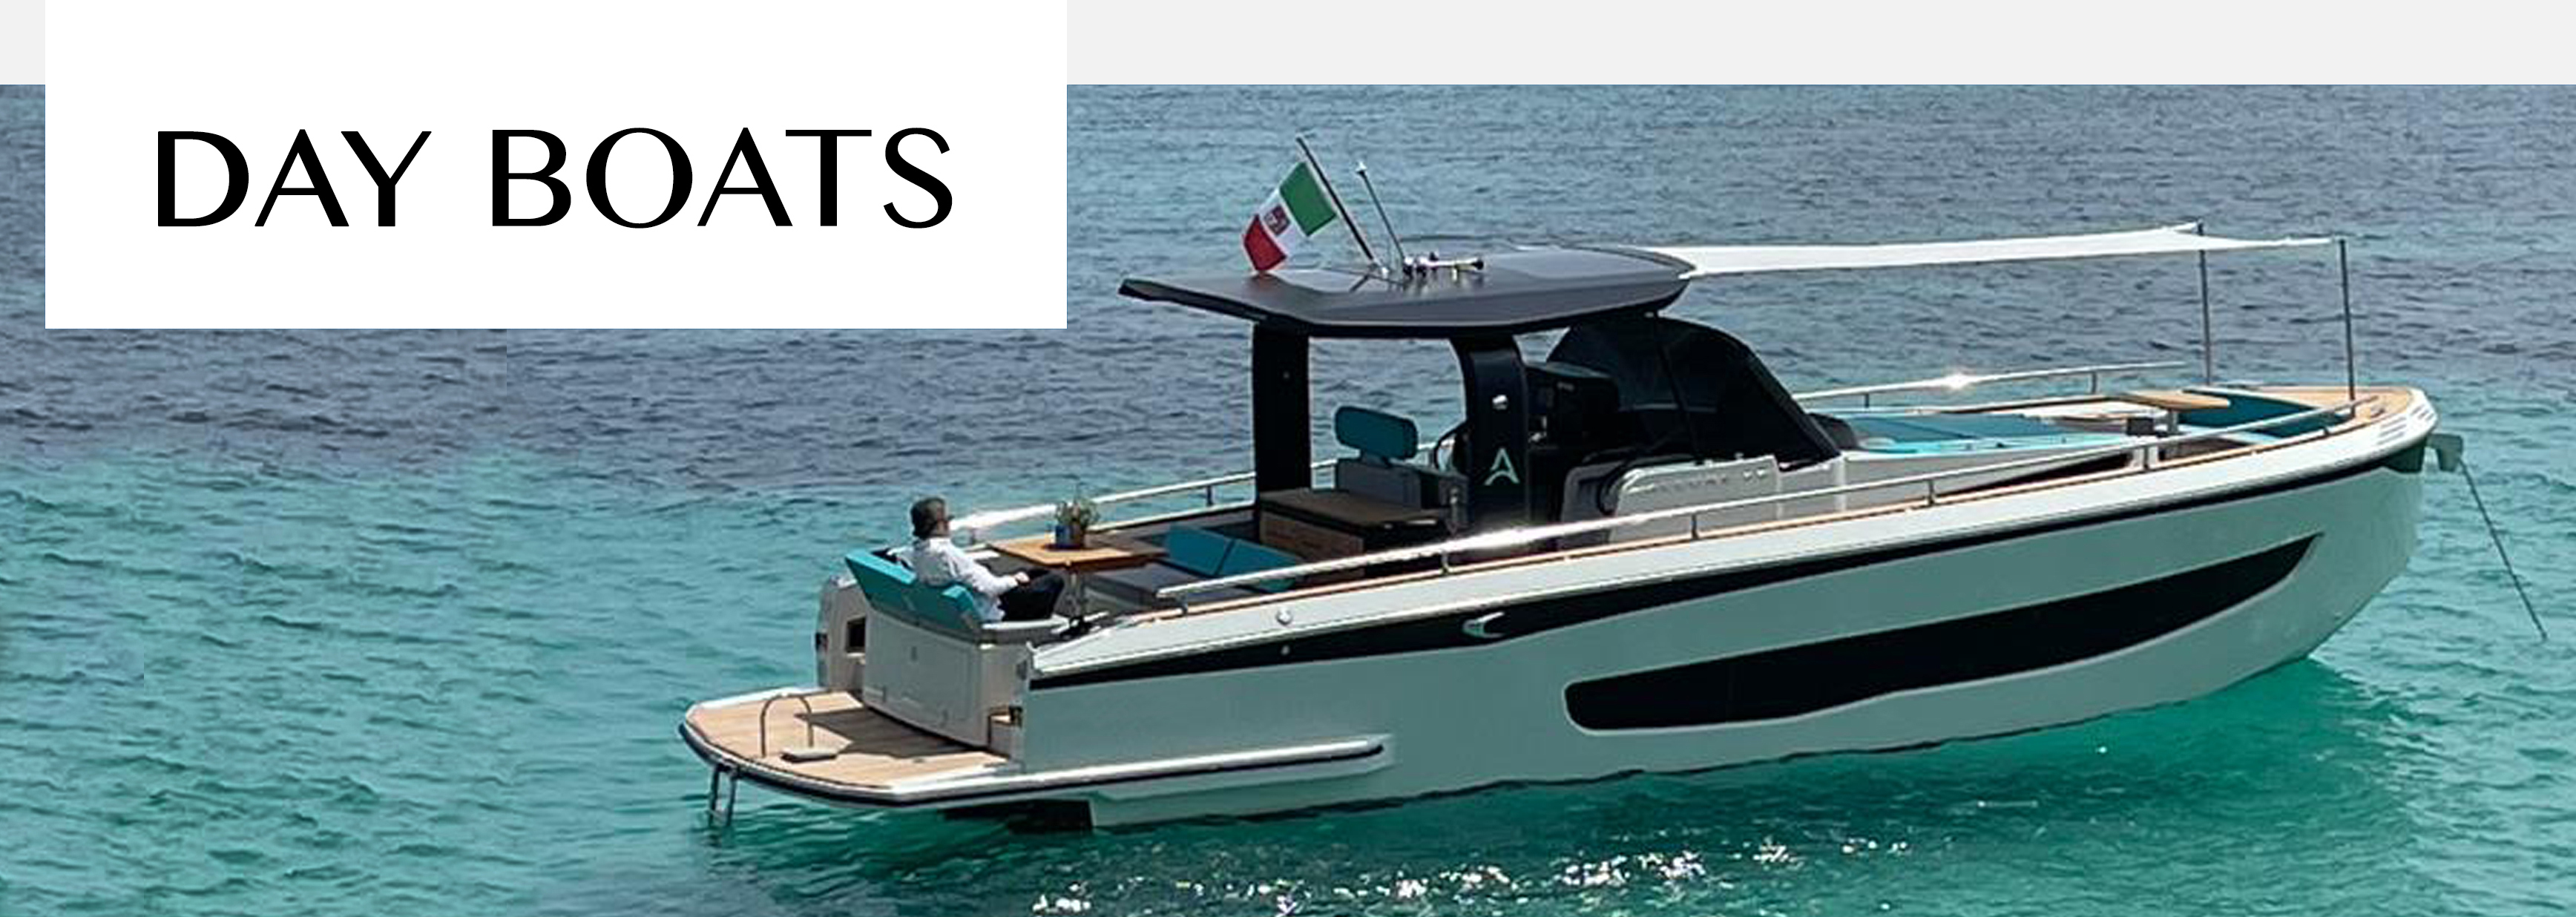 SPEED BOATS CHARTER